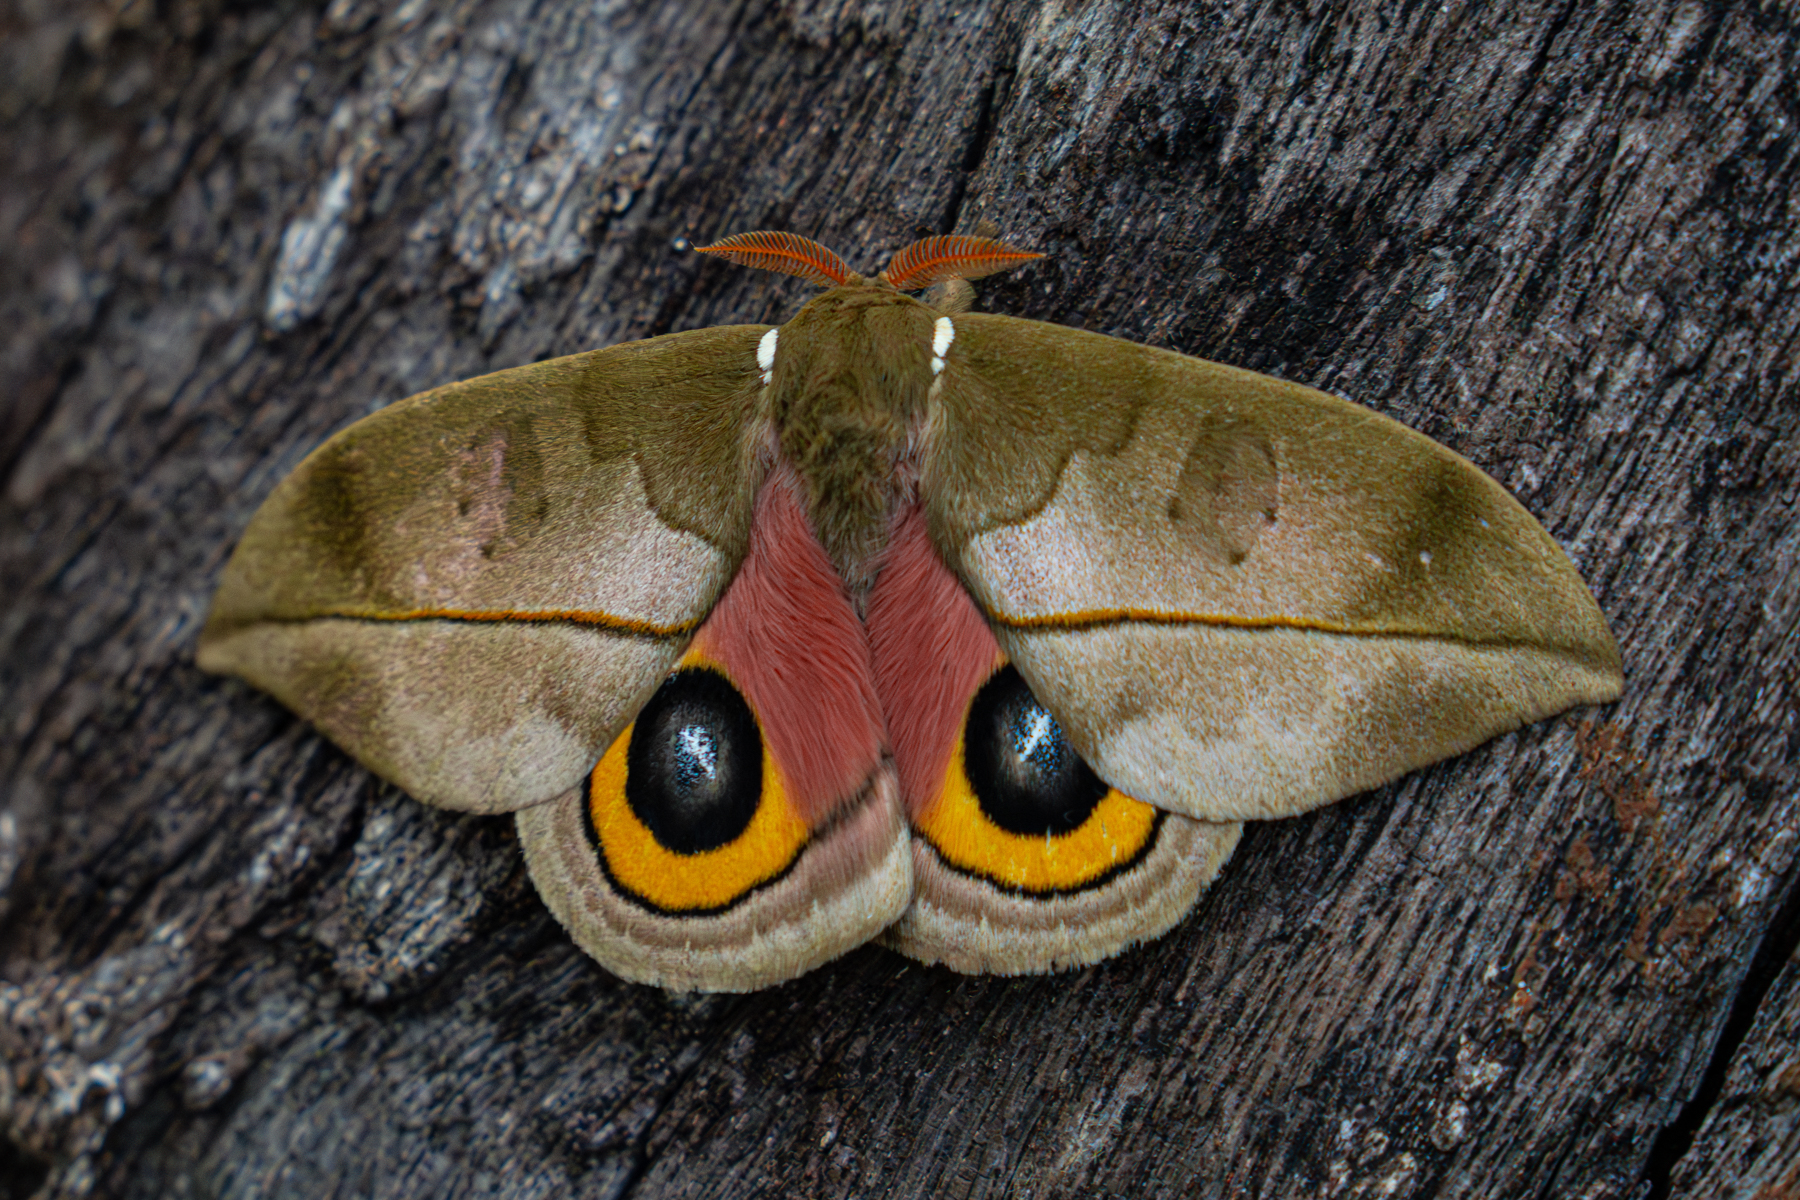 A beautiful Automeris moth with its wings open (image by Inger Vandyke)